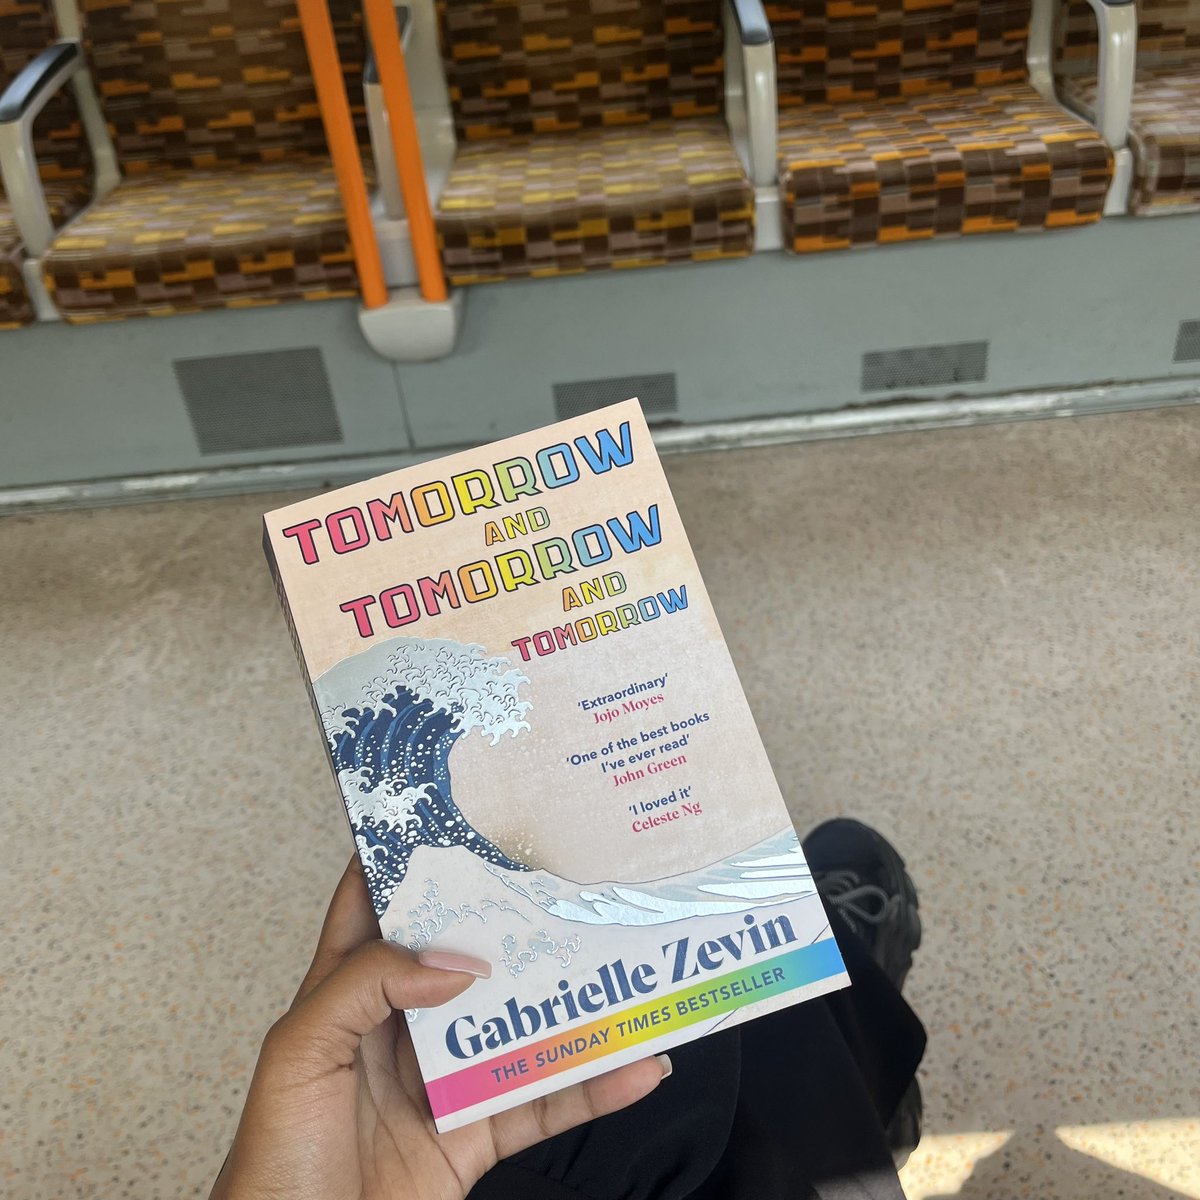 Today’s commute read🌊

Happy release day to the #tomorrowx3 paperback! I’m only about 20 pages in but I’m already emotionally invested in Sadie and Sam! So excited to see where this story takes me🩵